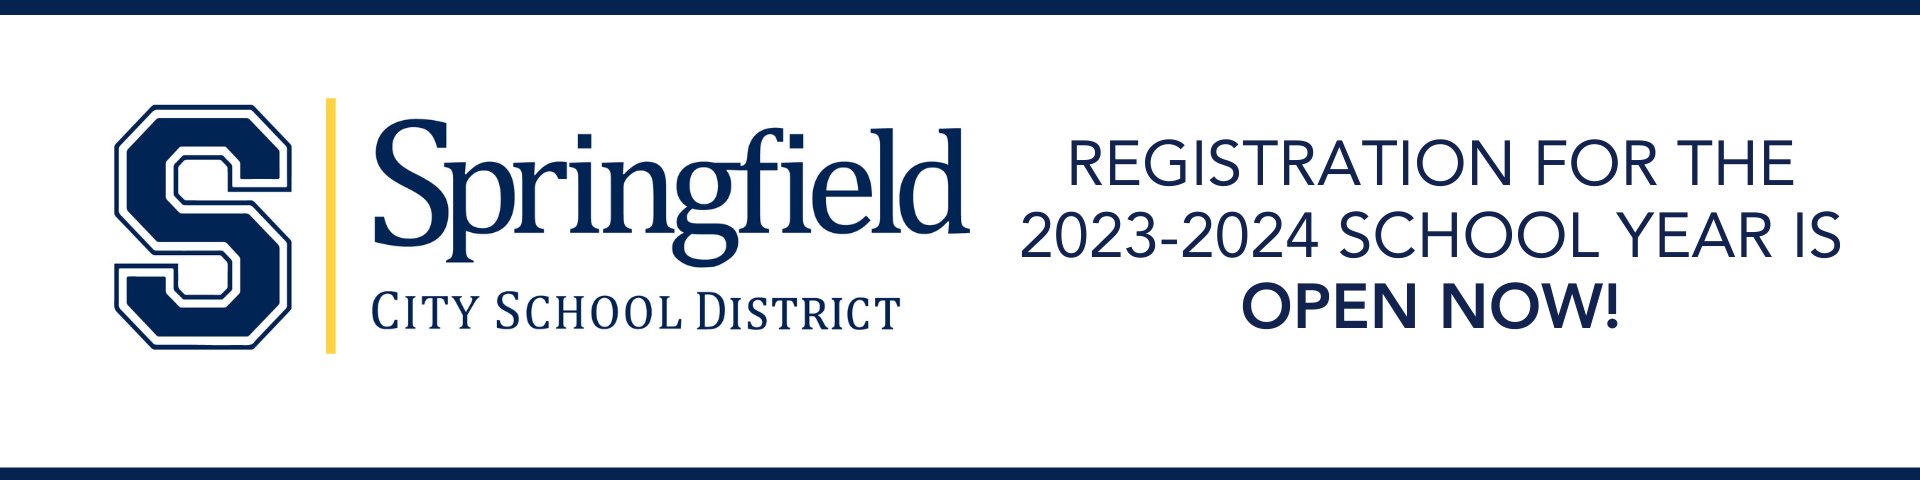 Registration for the 2023-2024 school year begins in April